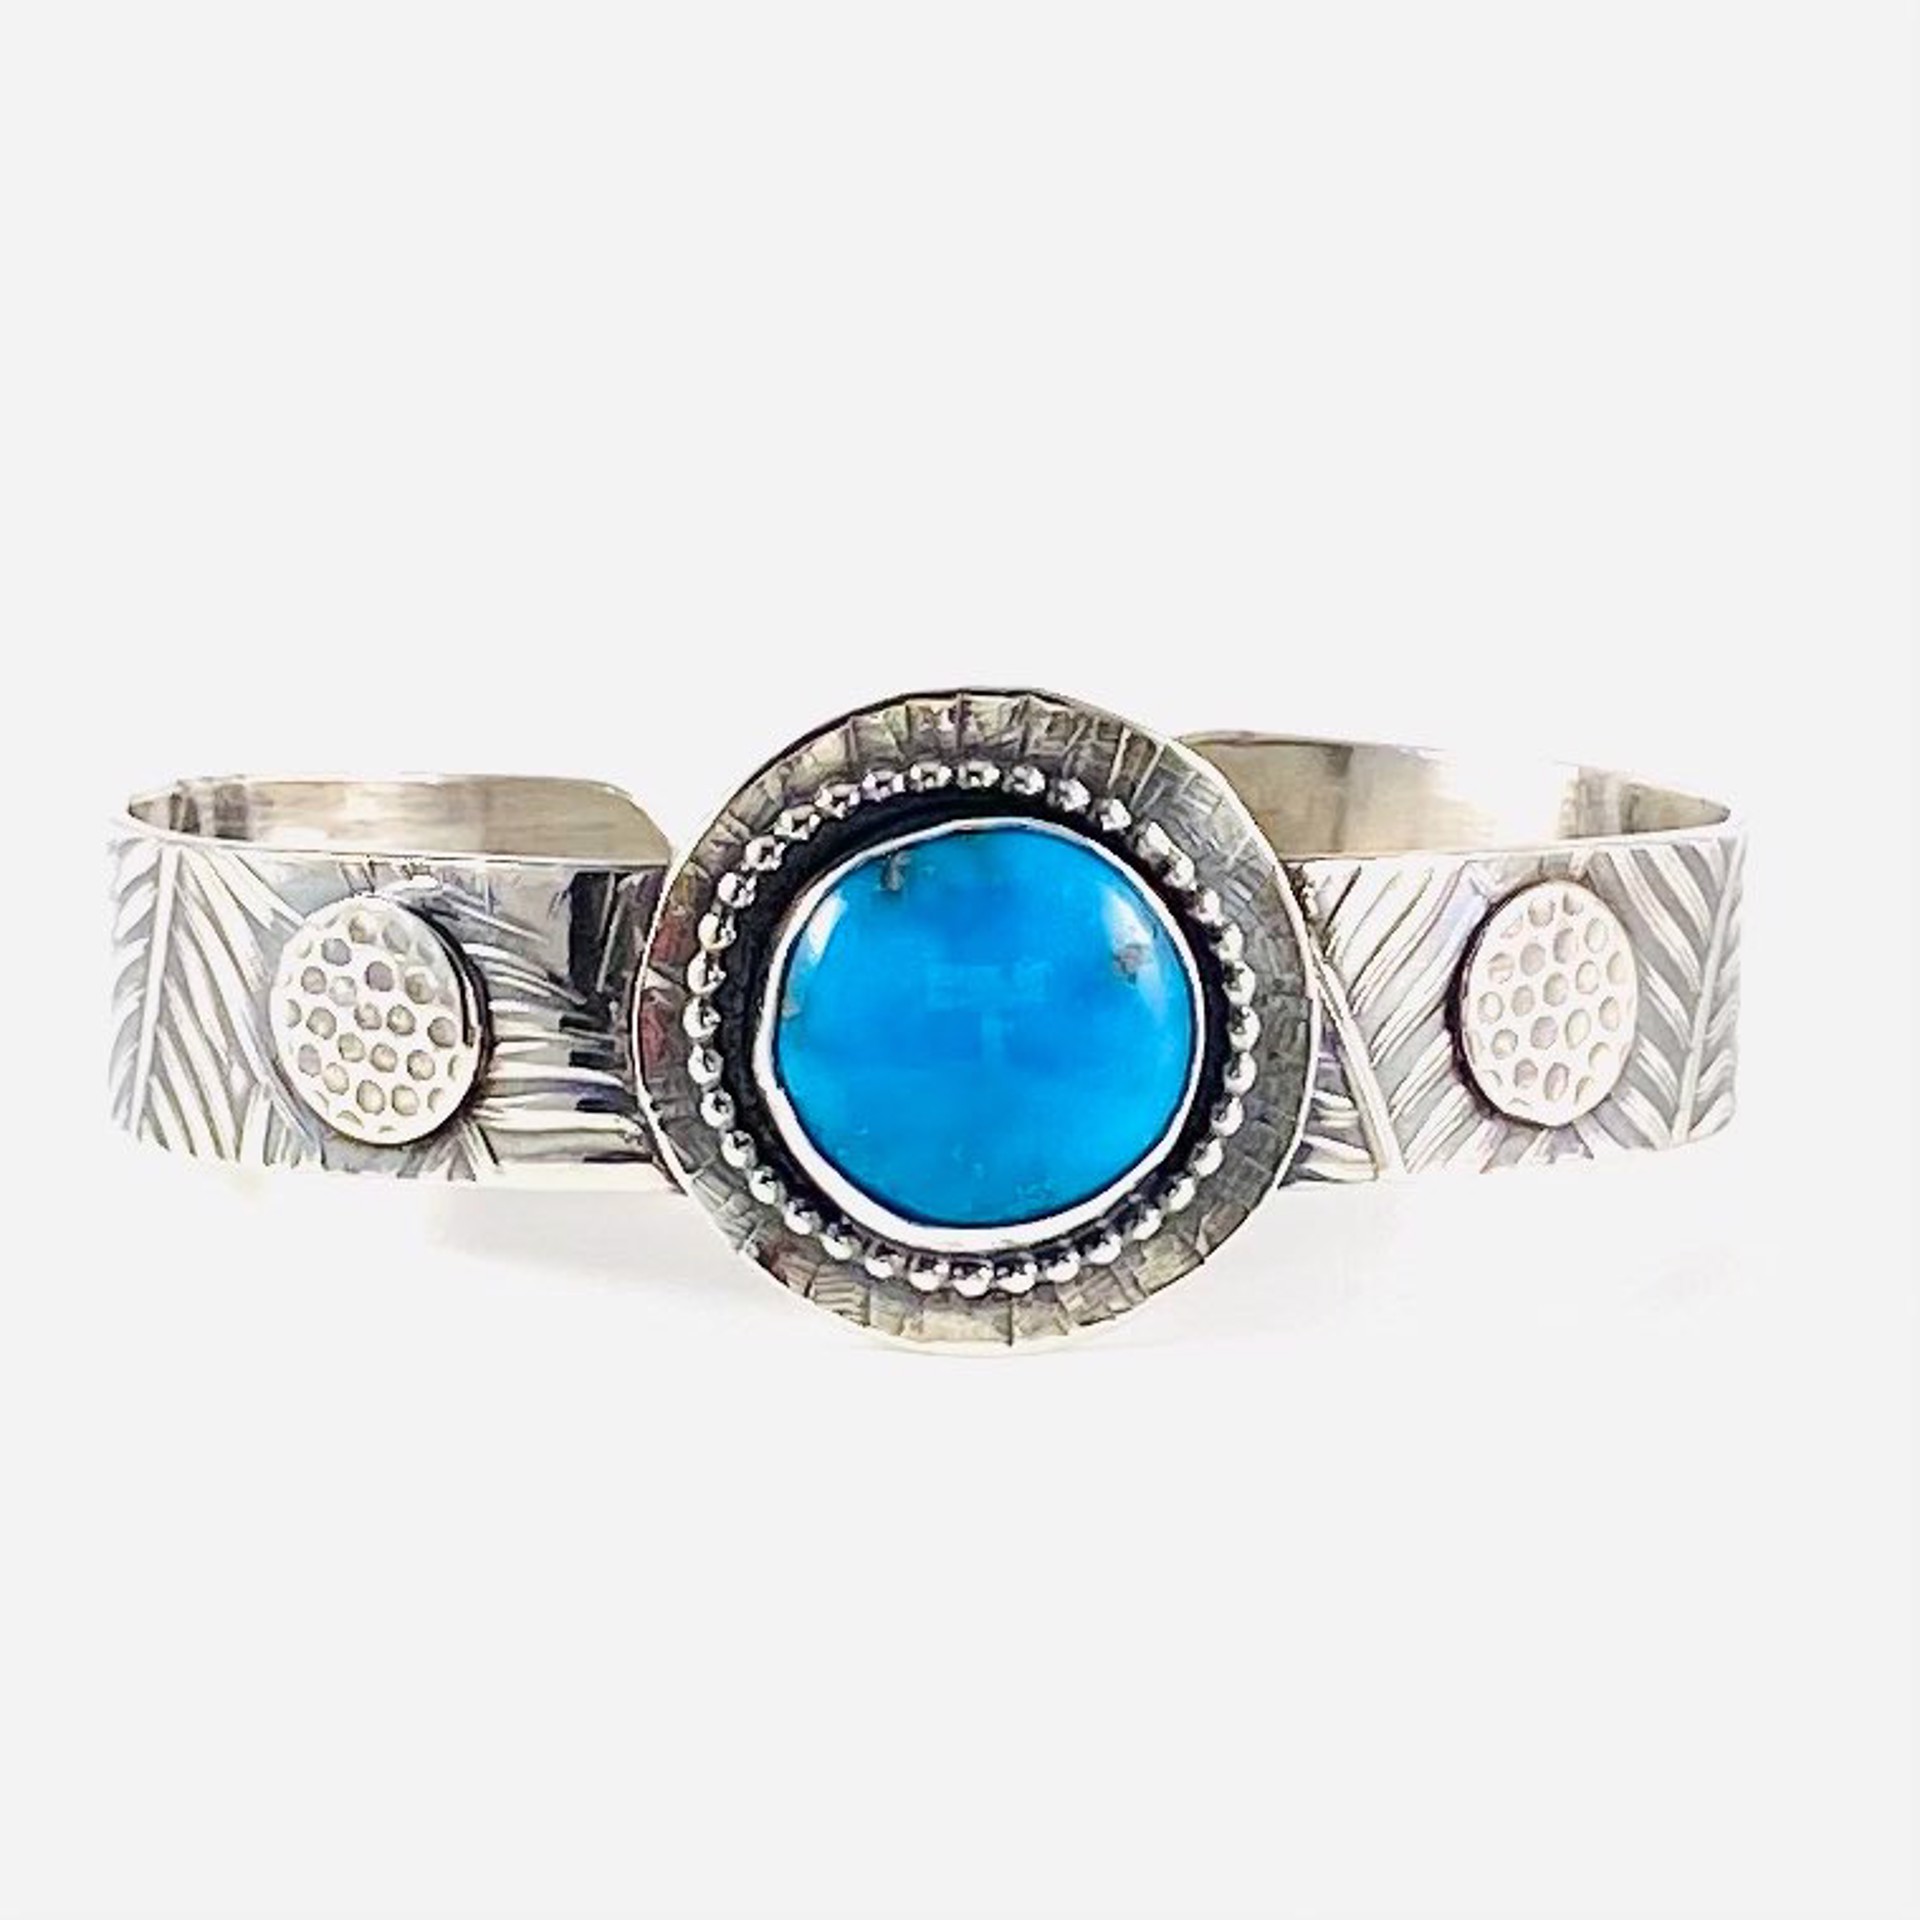 Round Bandit's Mine Turquoise on 1" center disc, bead accent and rolled leaf design Silver Cuff Bracelet AB22-73 by Anne Bivens